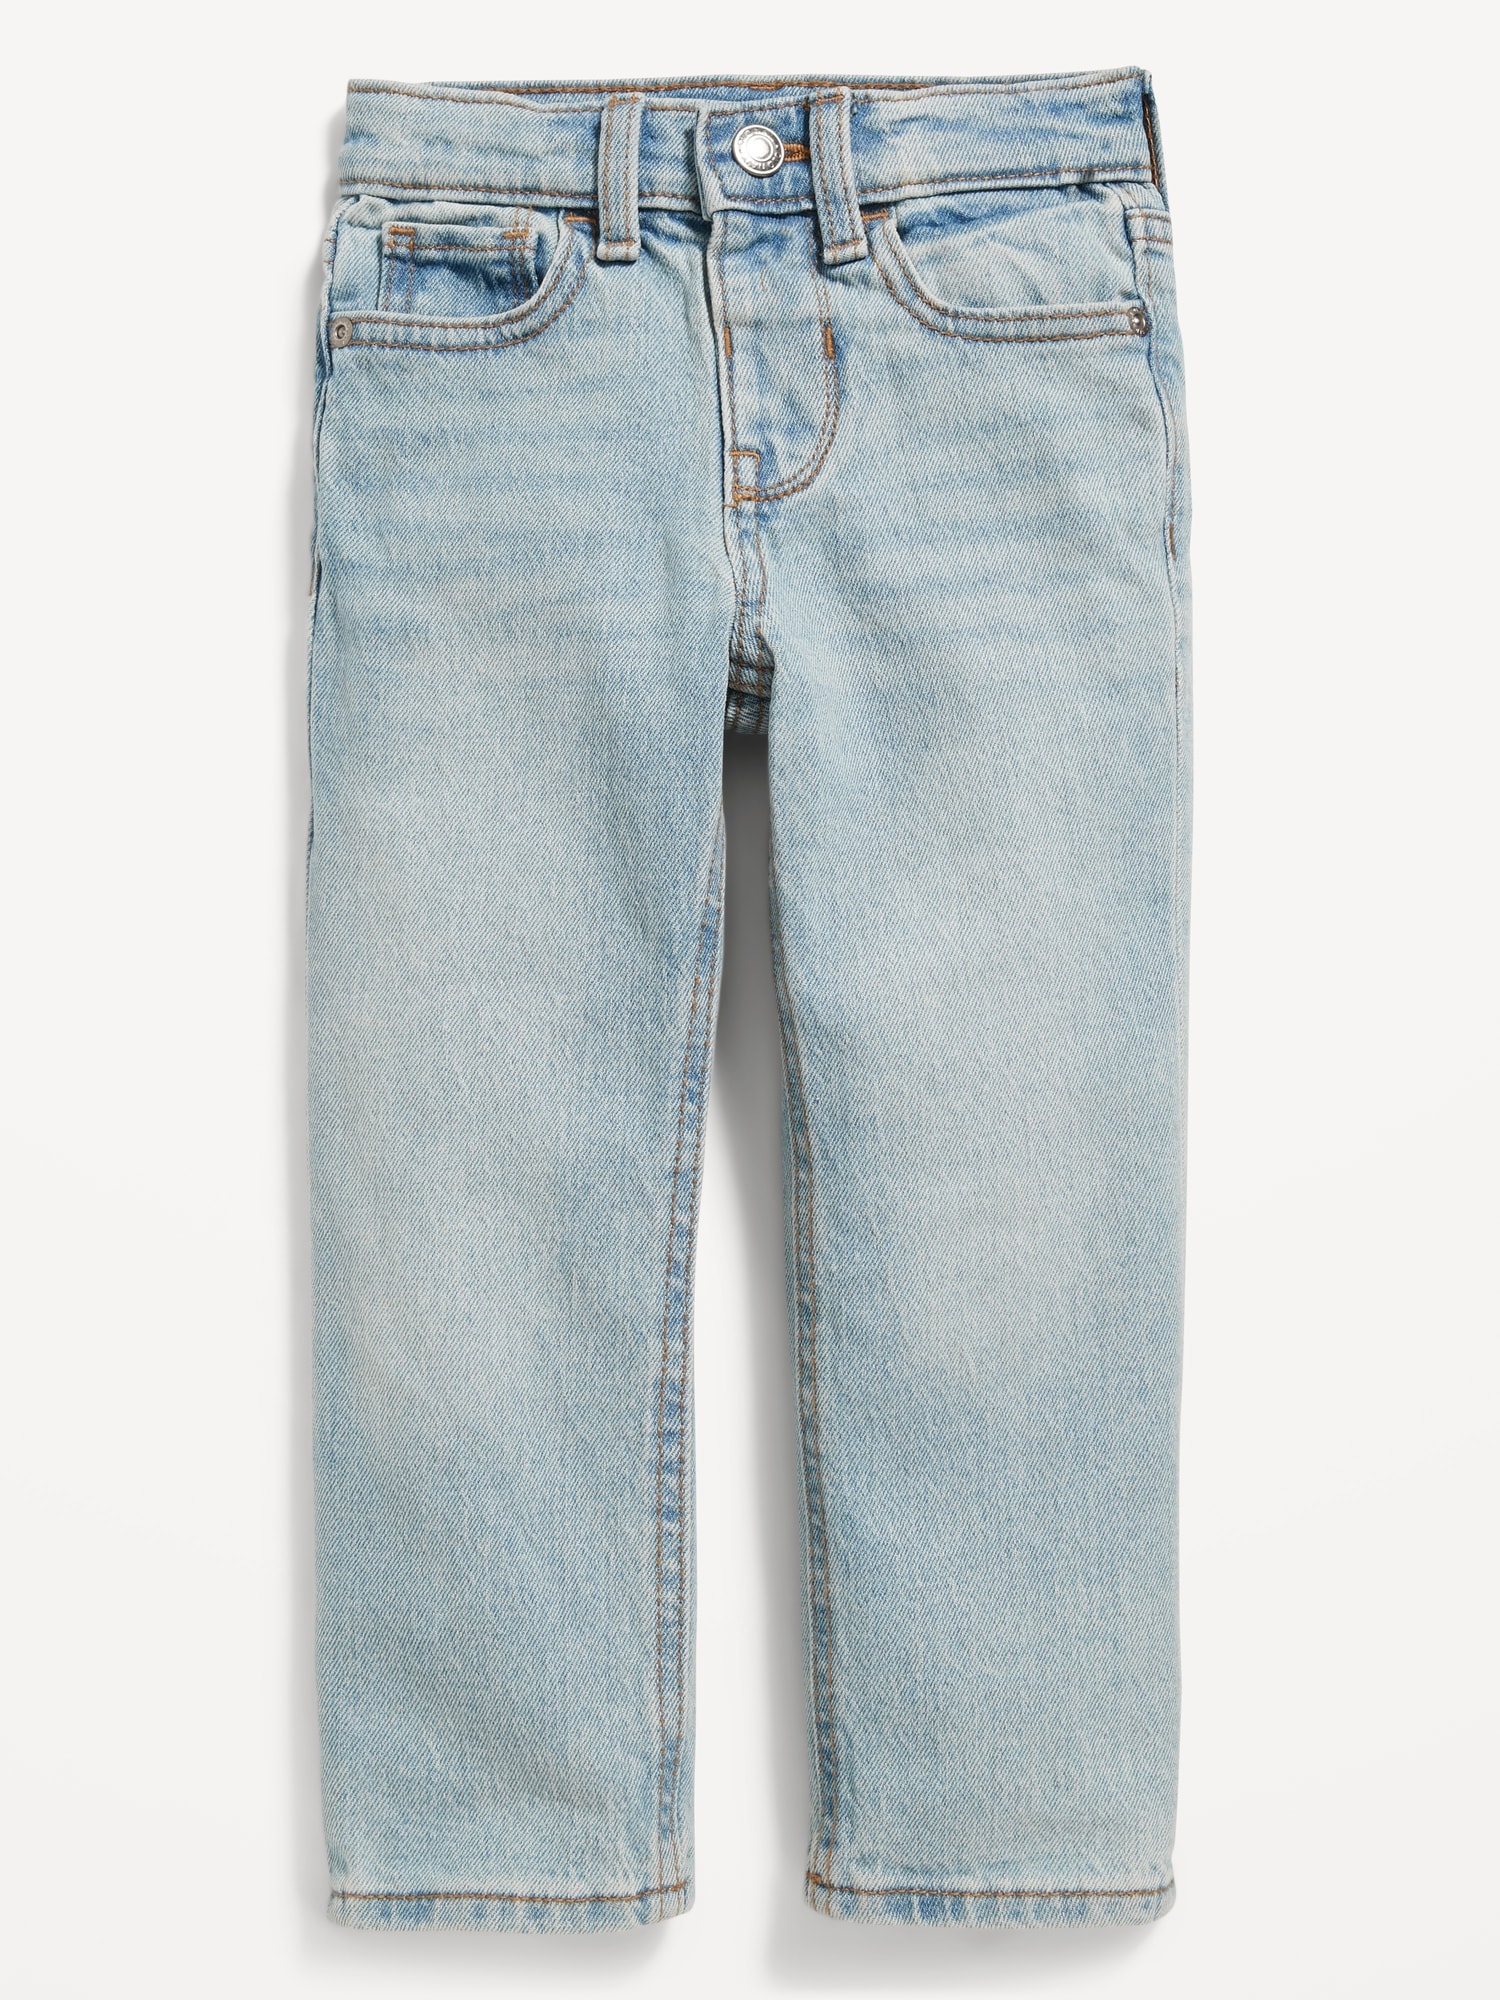 Straight Jeans for Toddler Boys